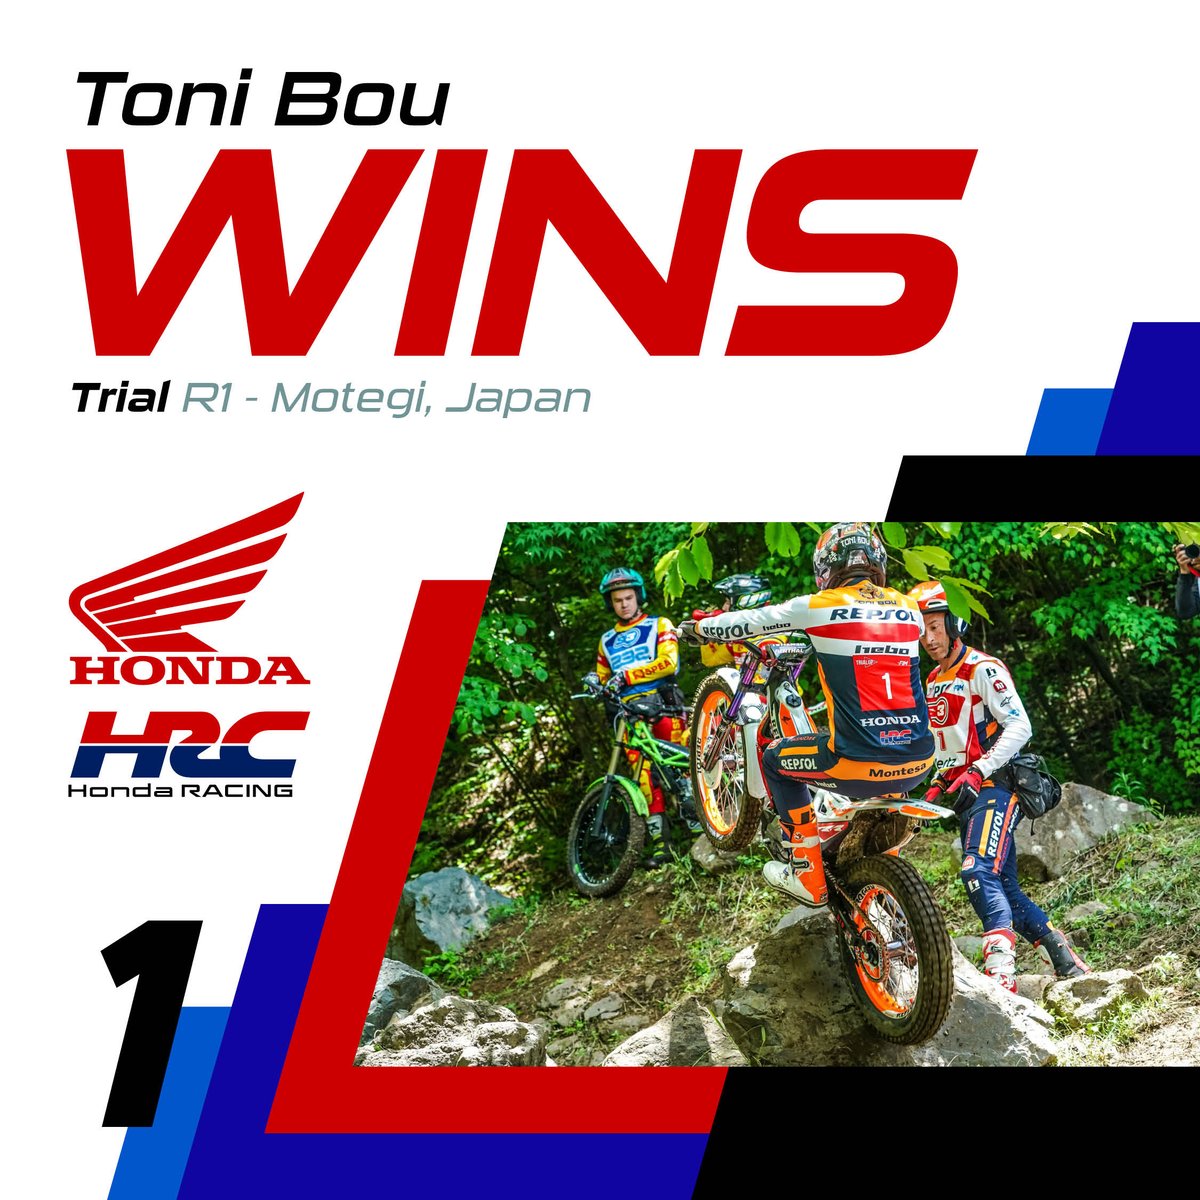 The first day in Japan for the Trial outdoor series this season ends with victory for Toni Bou #Honda #TrialGP